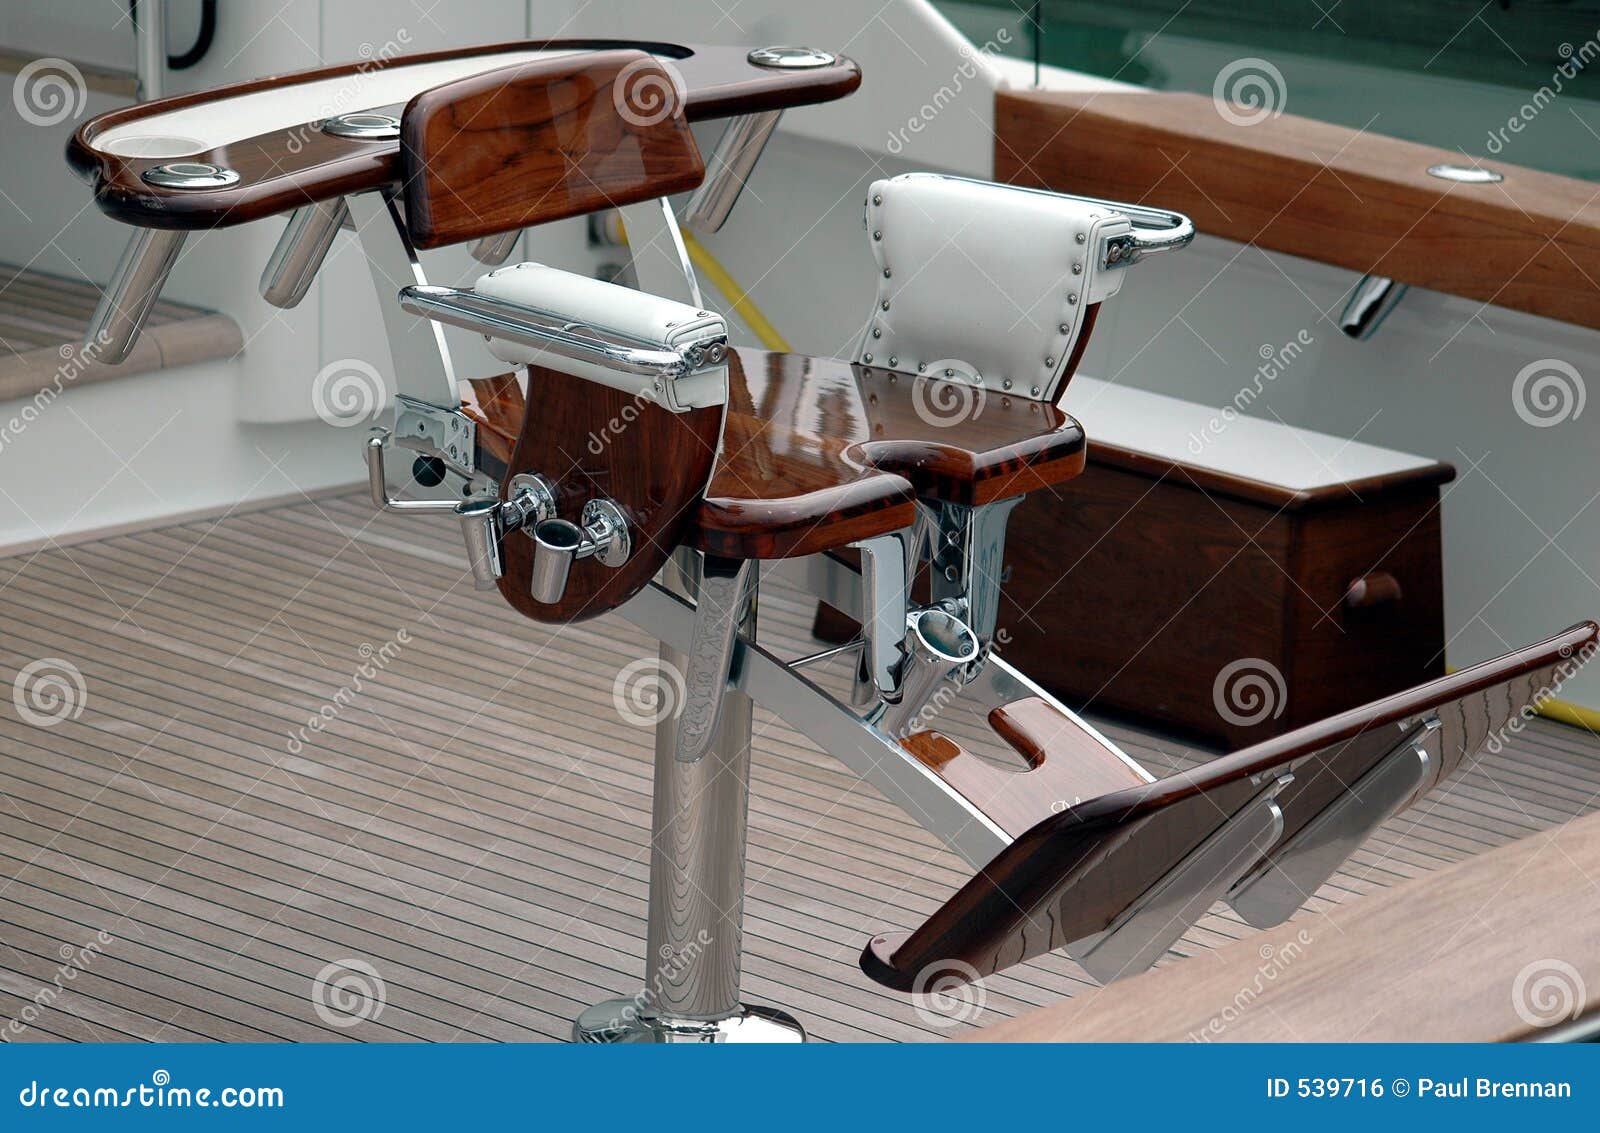 Sport Fishing Chair stock photo. Image of ocean, chair - 539716